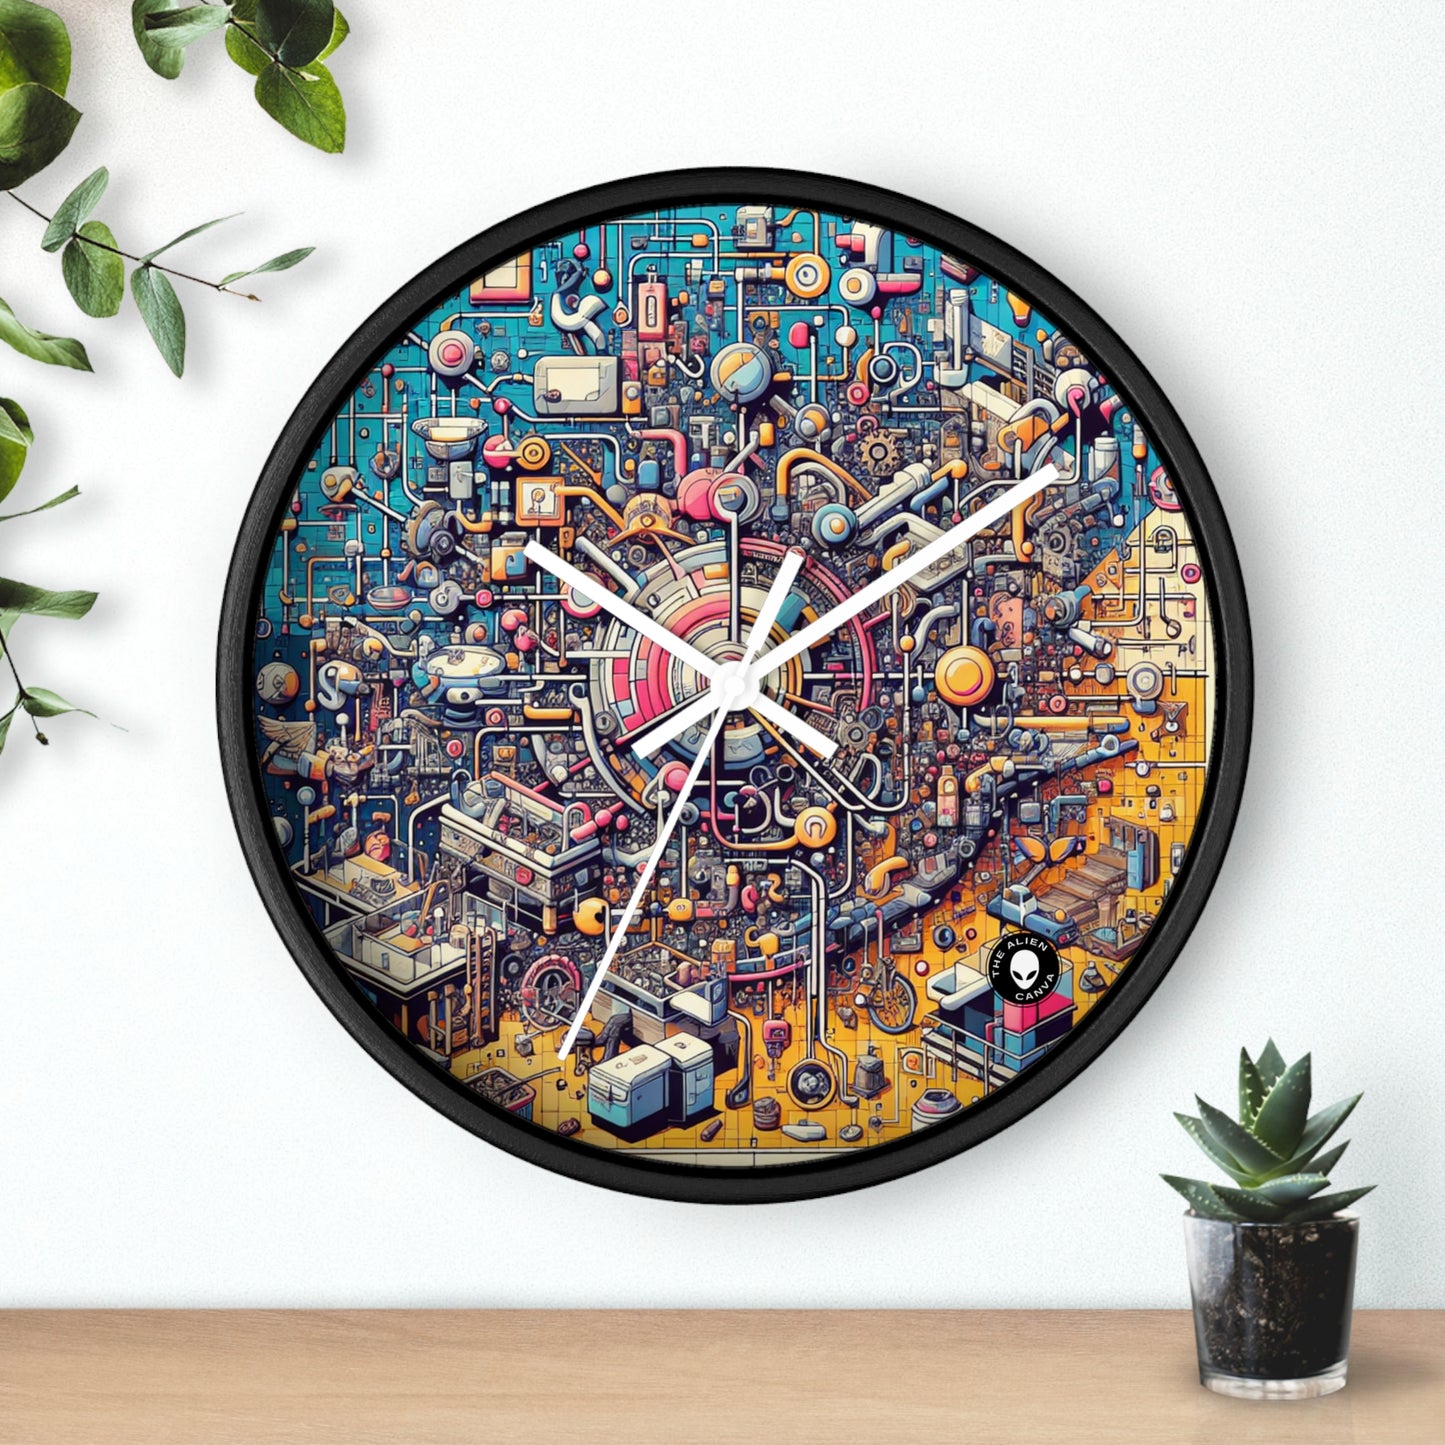 "Connection Points: Exploring Human Interactions in Public Spaces" - The Alien Wall Clock Relational Art